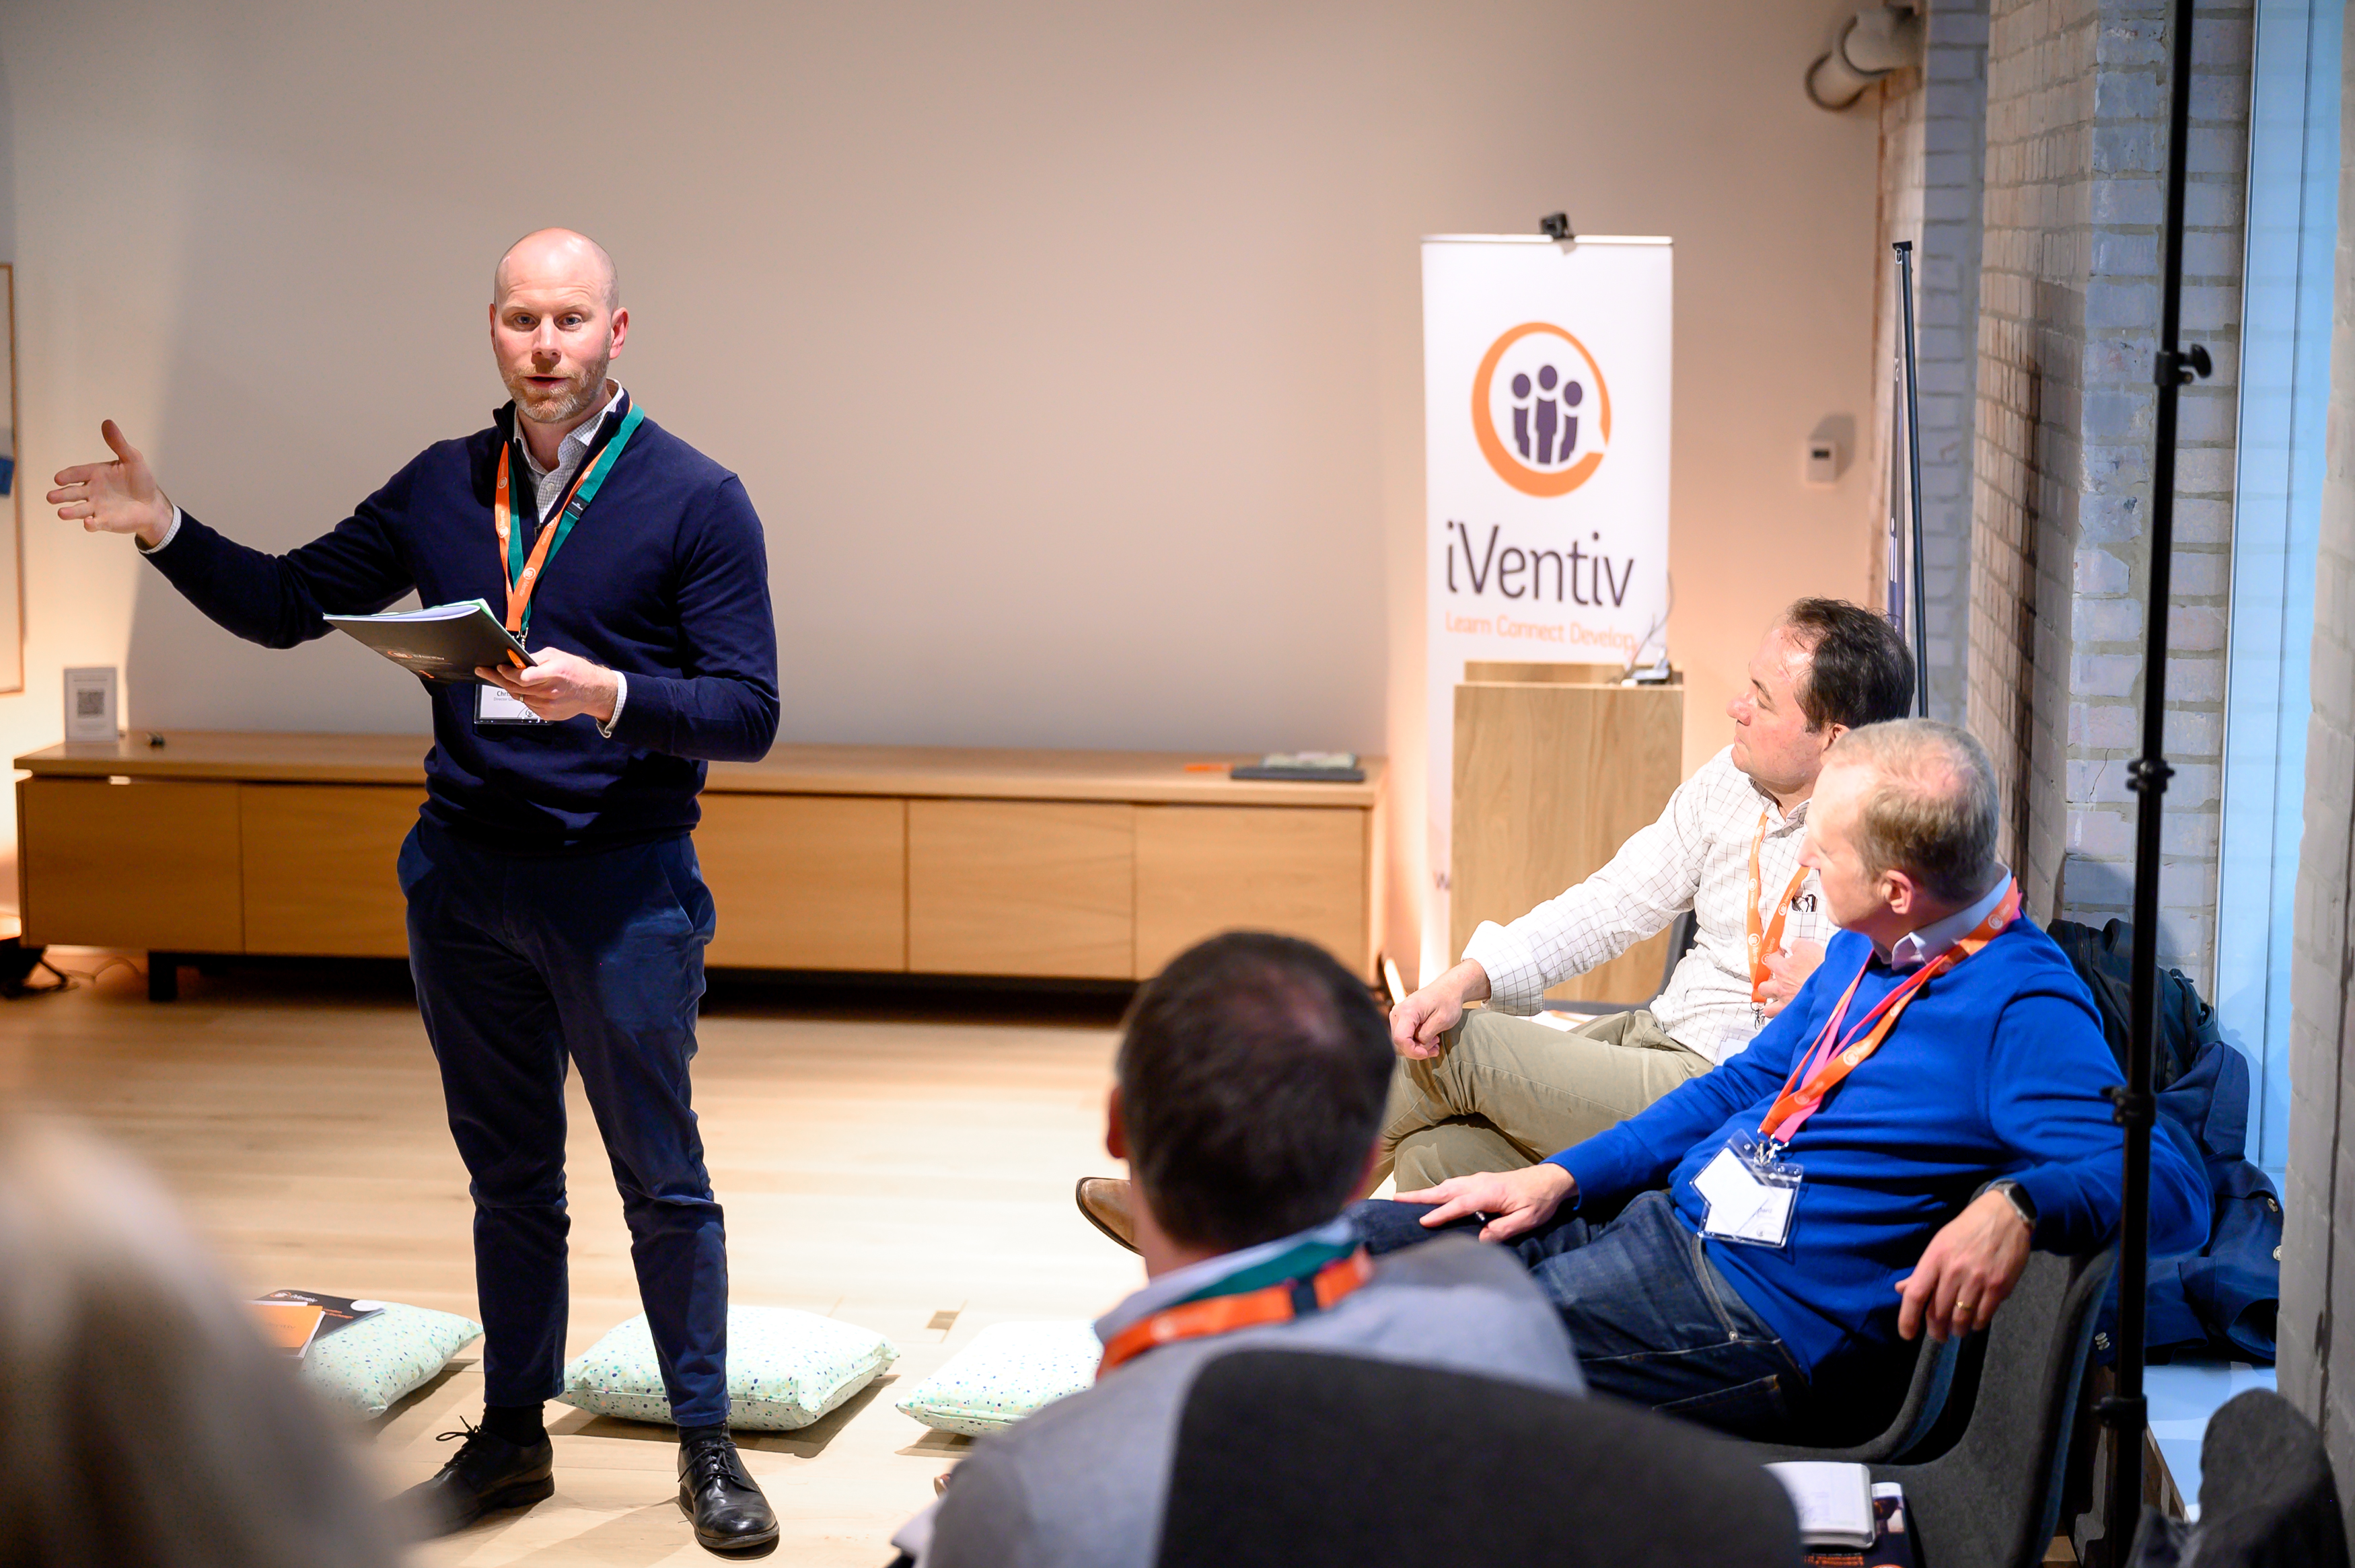 Participants sharing insights at an iVentiv event in London